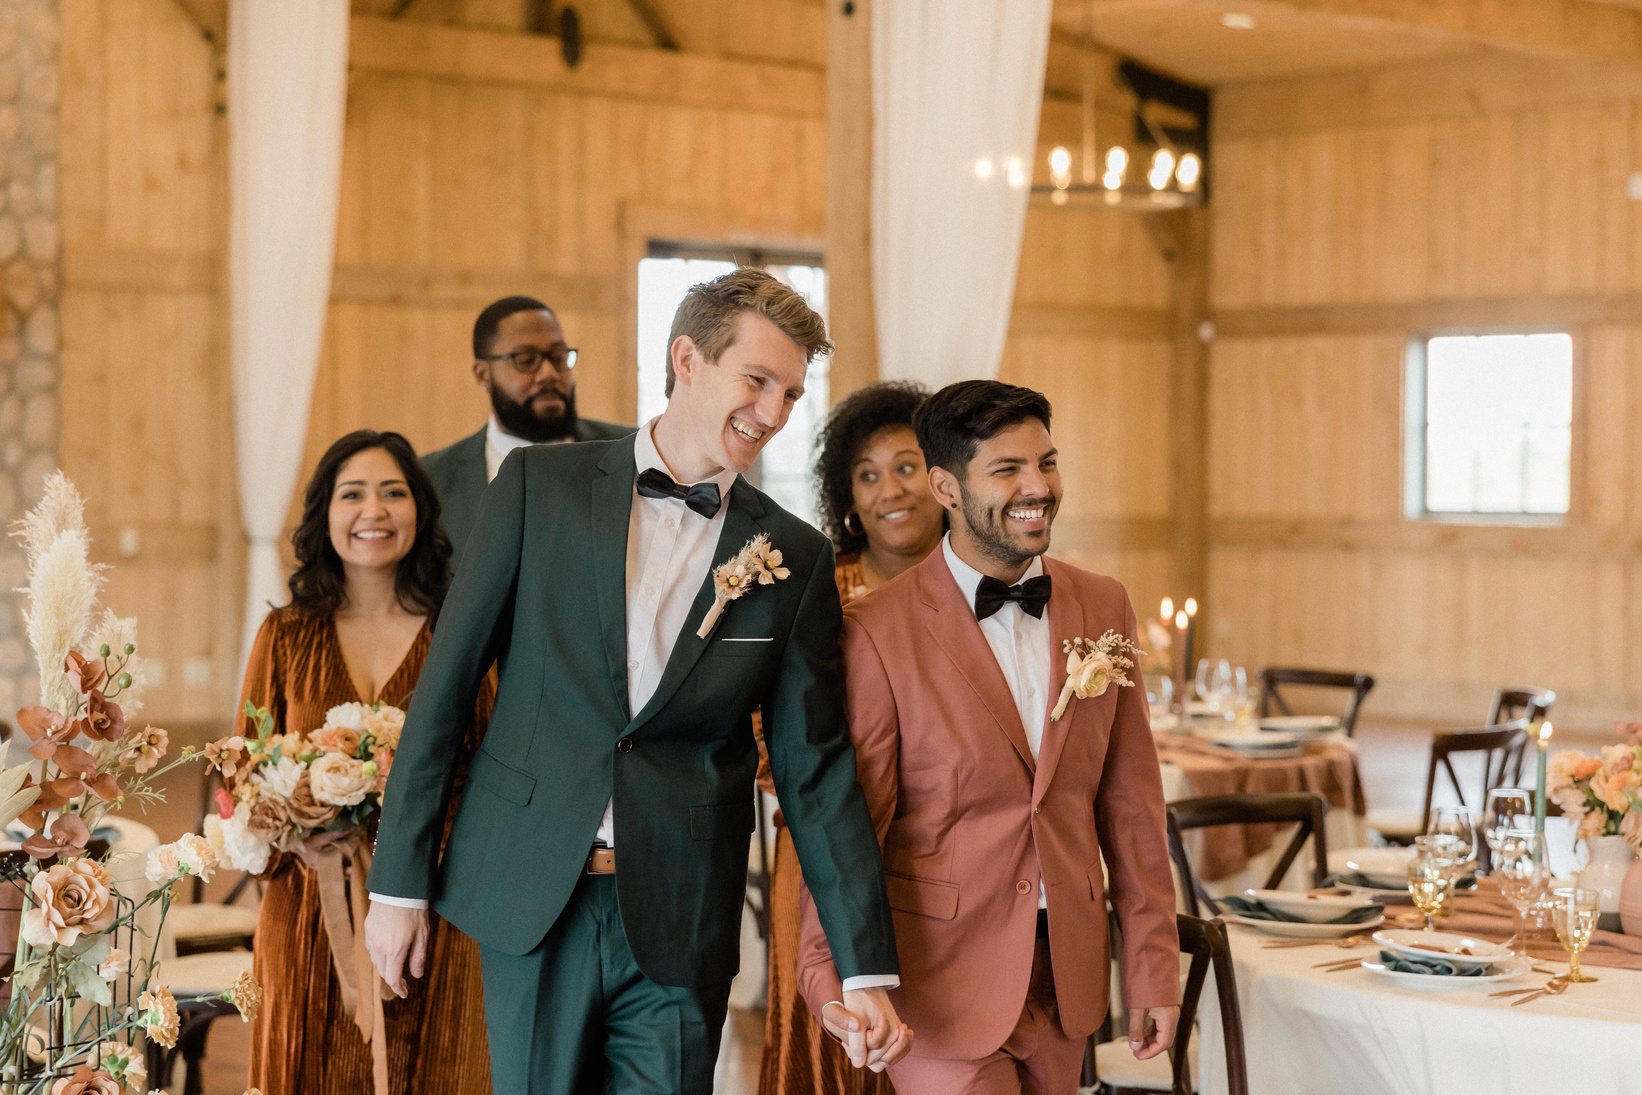 Newlywed Couple Walking in the Reception with Friends